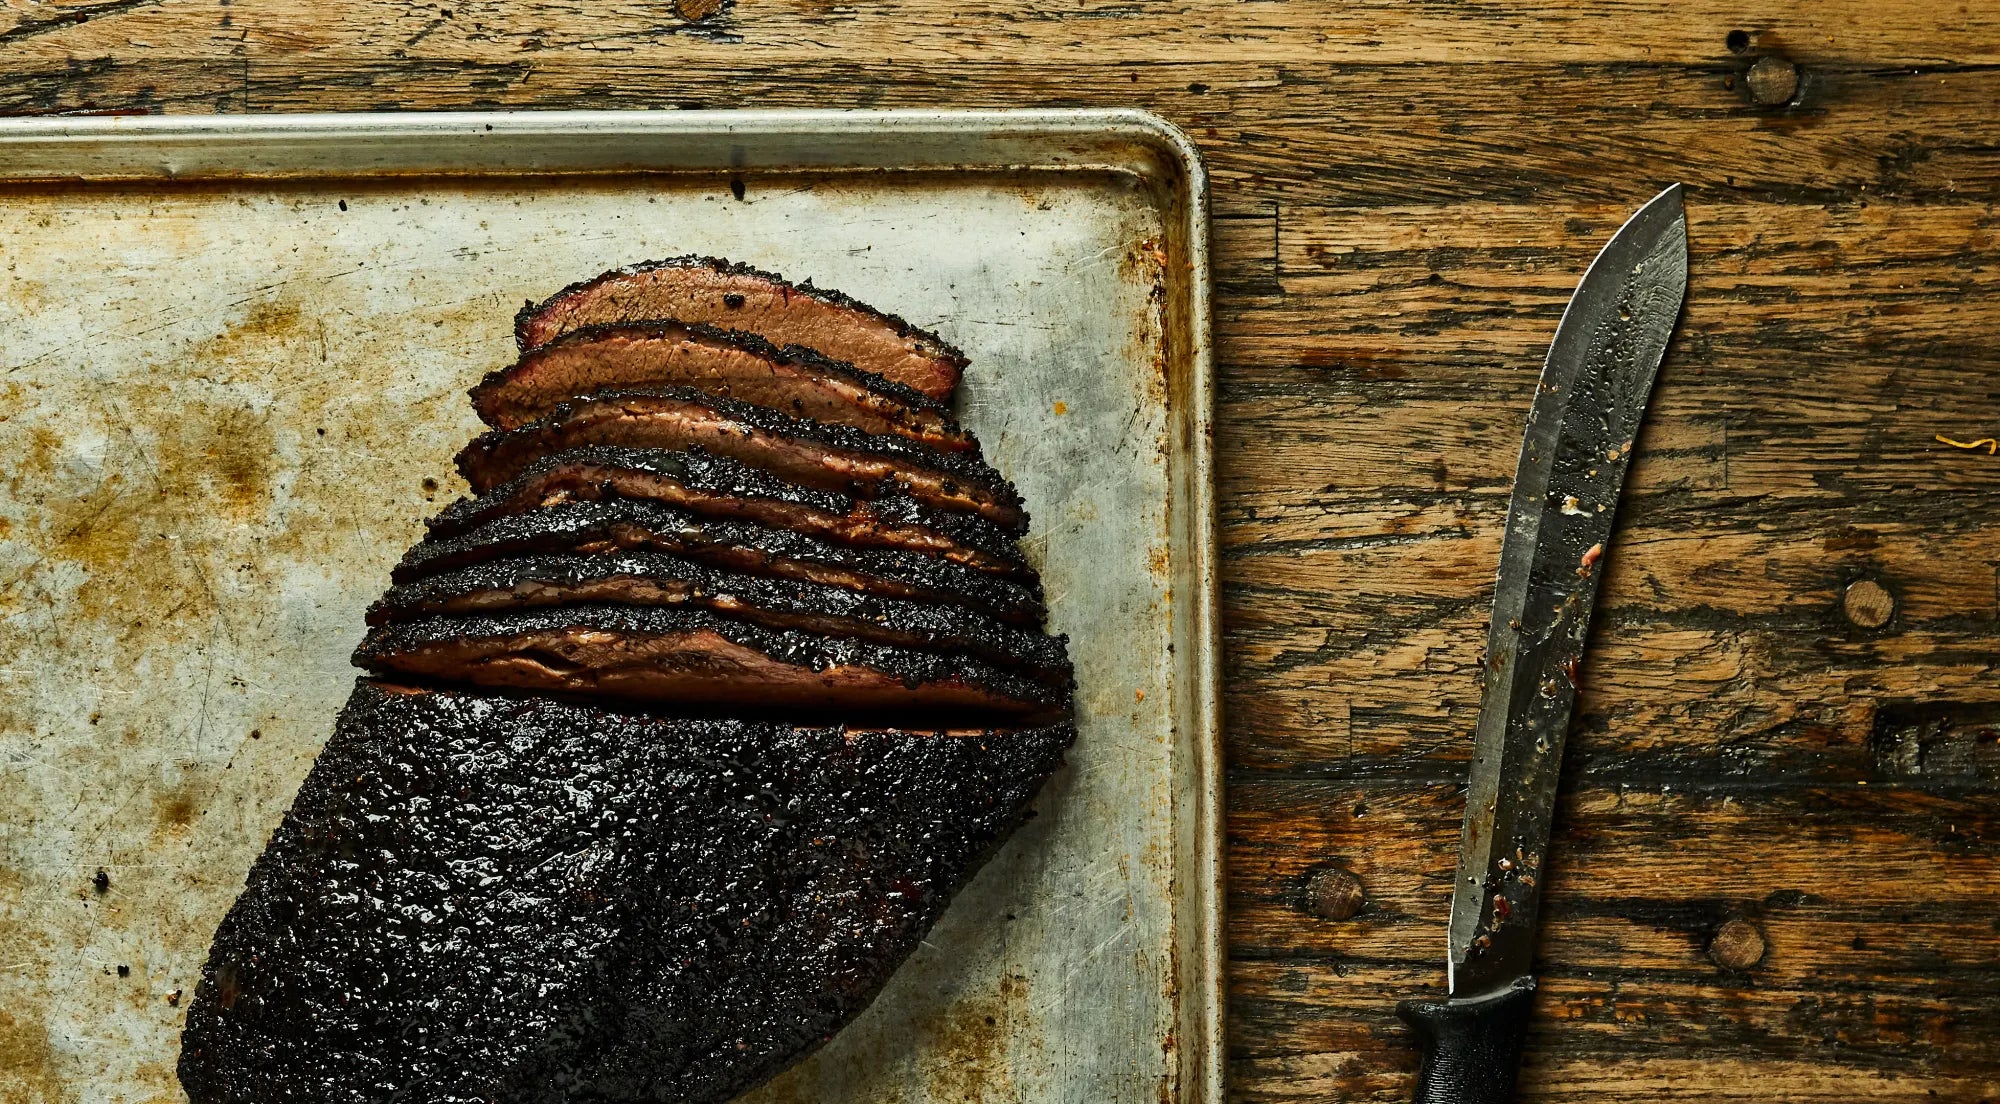 How to Make the Best Brisket at Home According to Hutchins BBQ